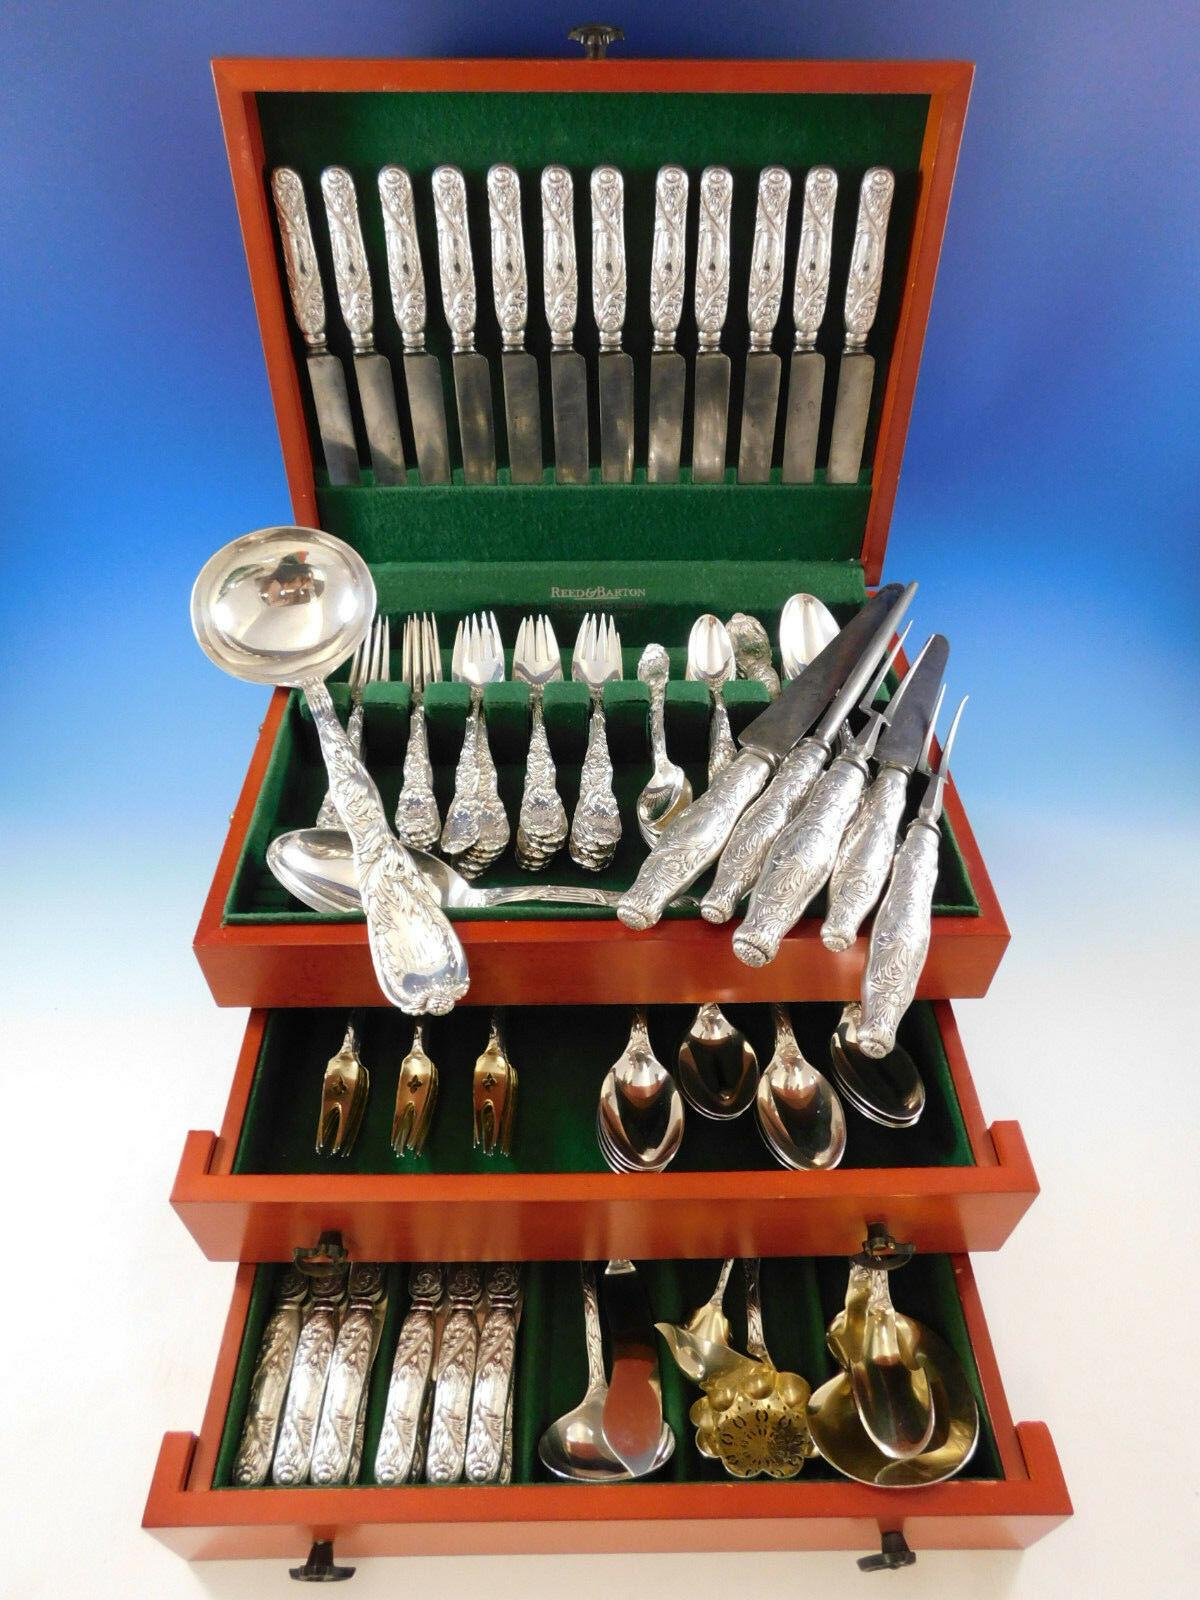 Superb Chrysanthemum by Tiffany & Co. sterling silver flatware set - 115 pieces. This set includes:

12 knives, 9 1/4